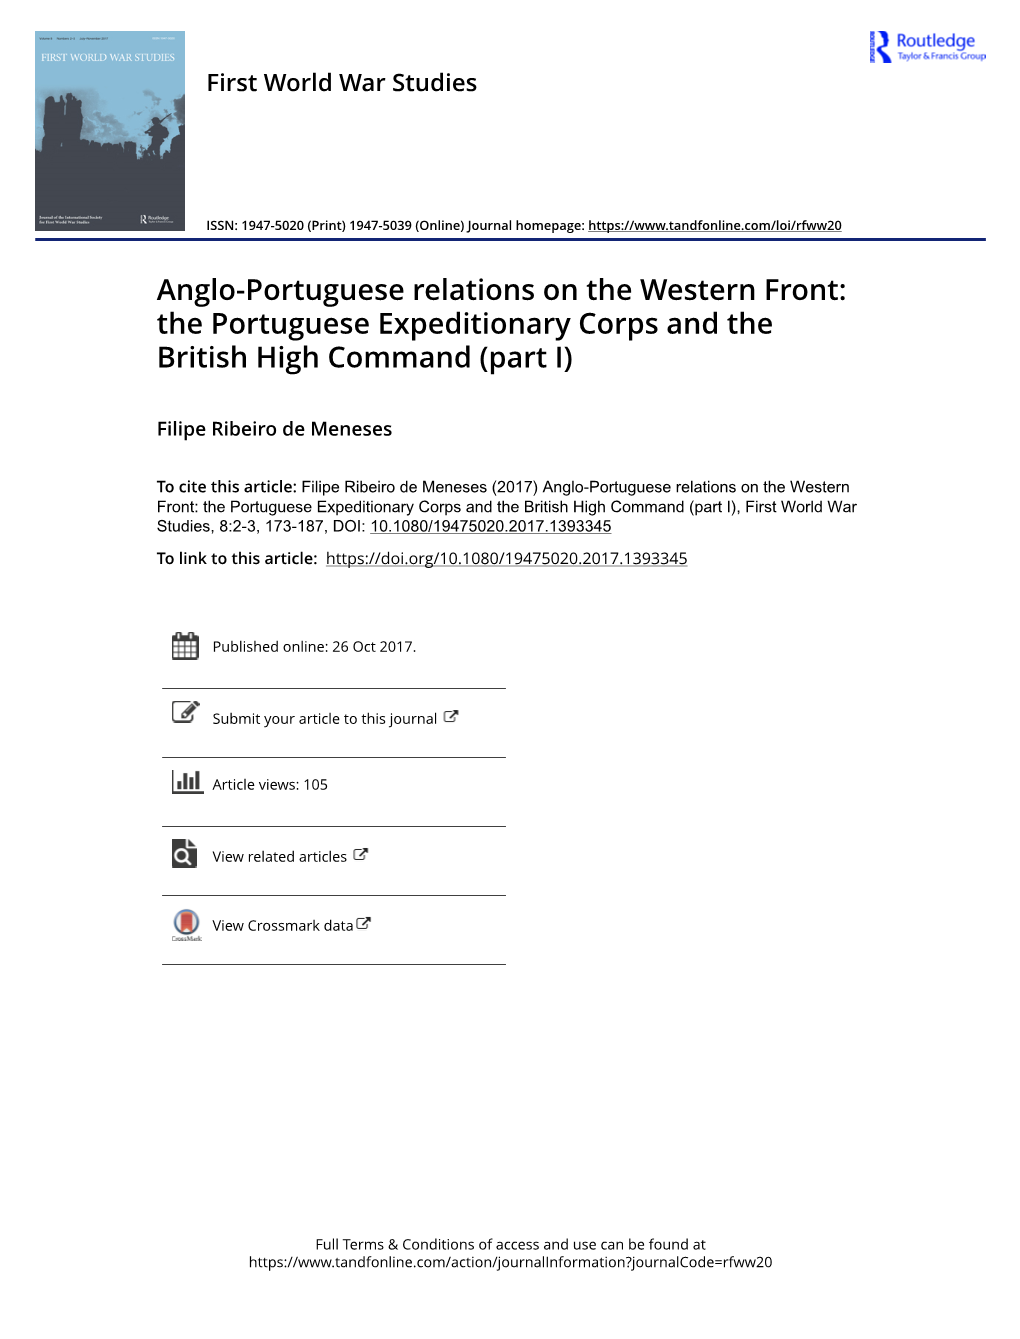 Anglo-Portuguese Relations on the Western Front: the Portuguese Expeditionary Corps and the British High Command (Part I)